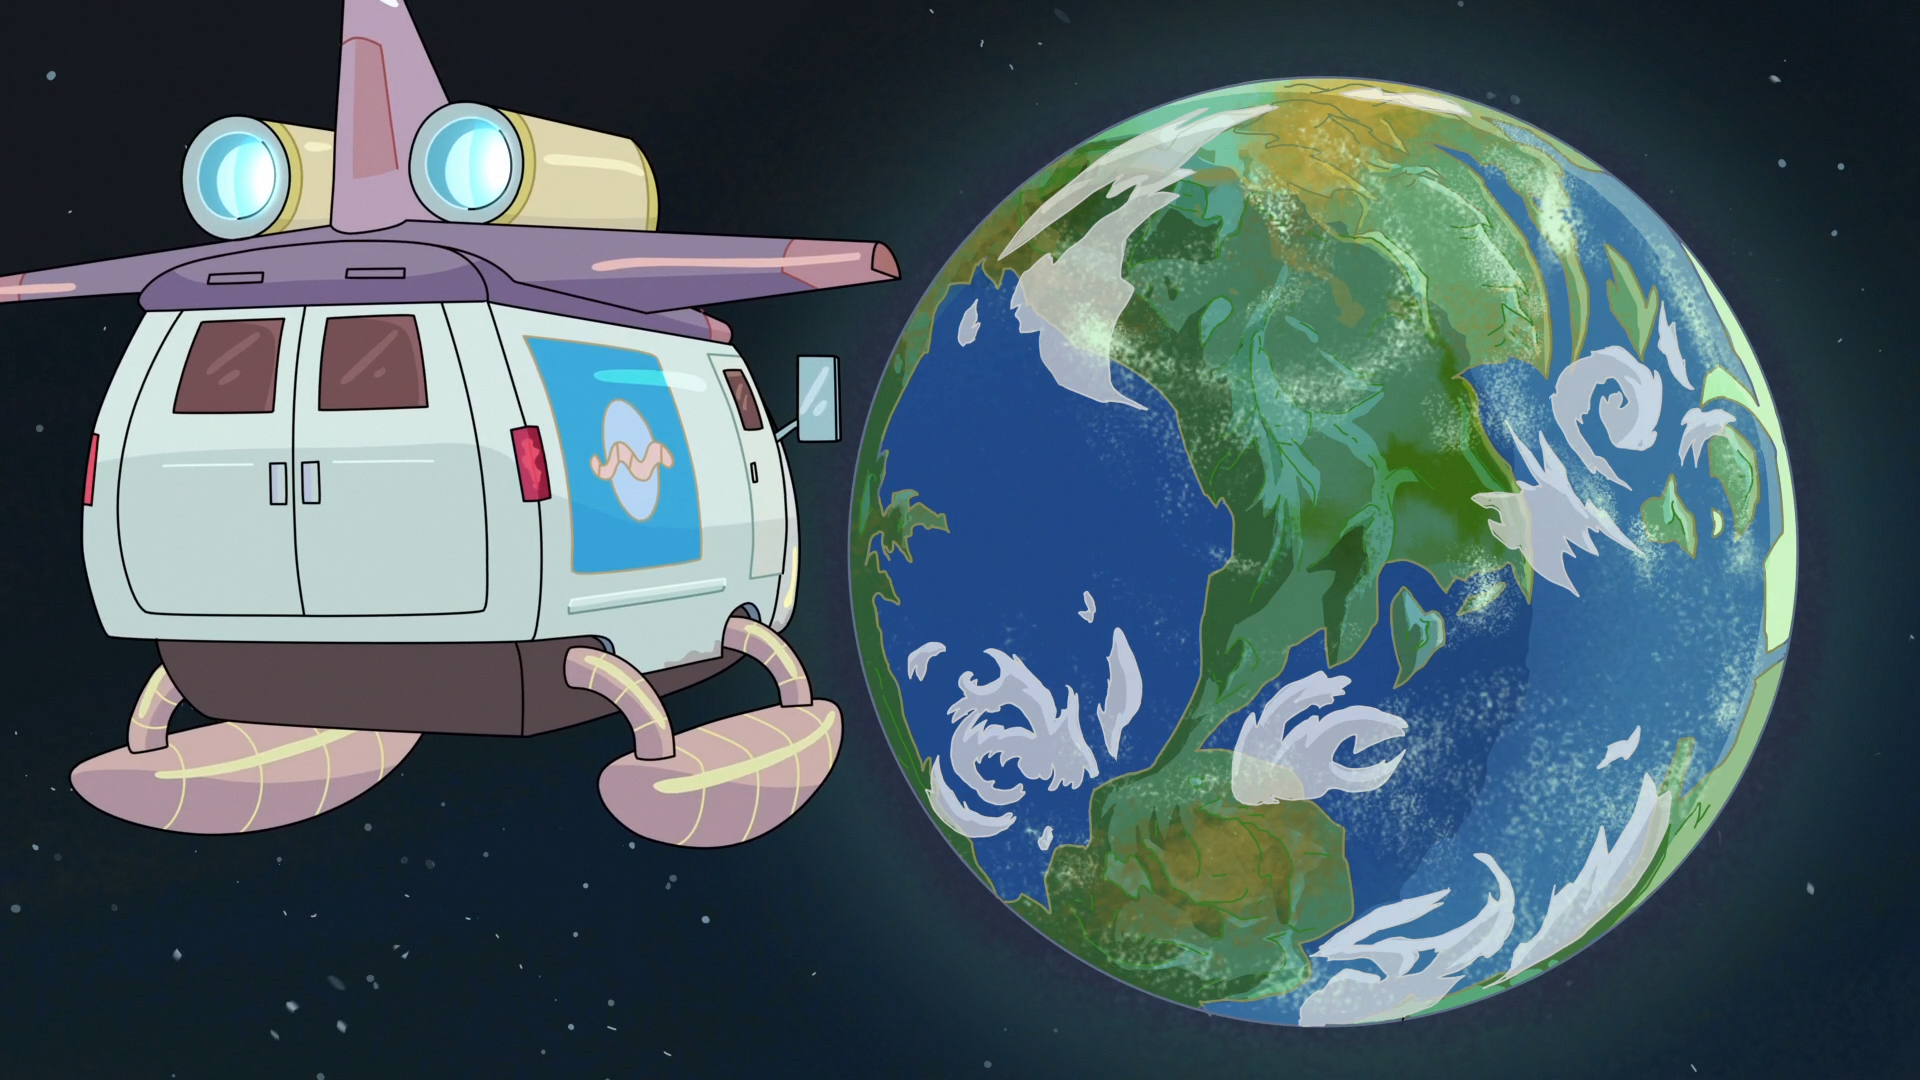 General 1920x1080 Rick and Morty Adult Swim cartoon TV series science fiction planet space vehicle